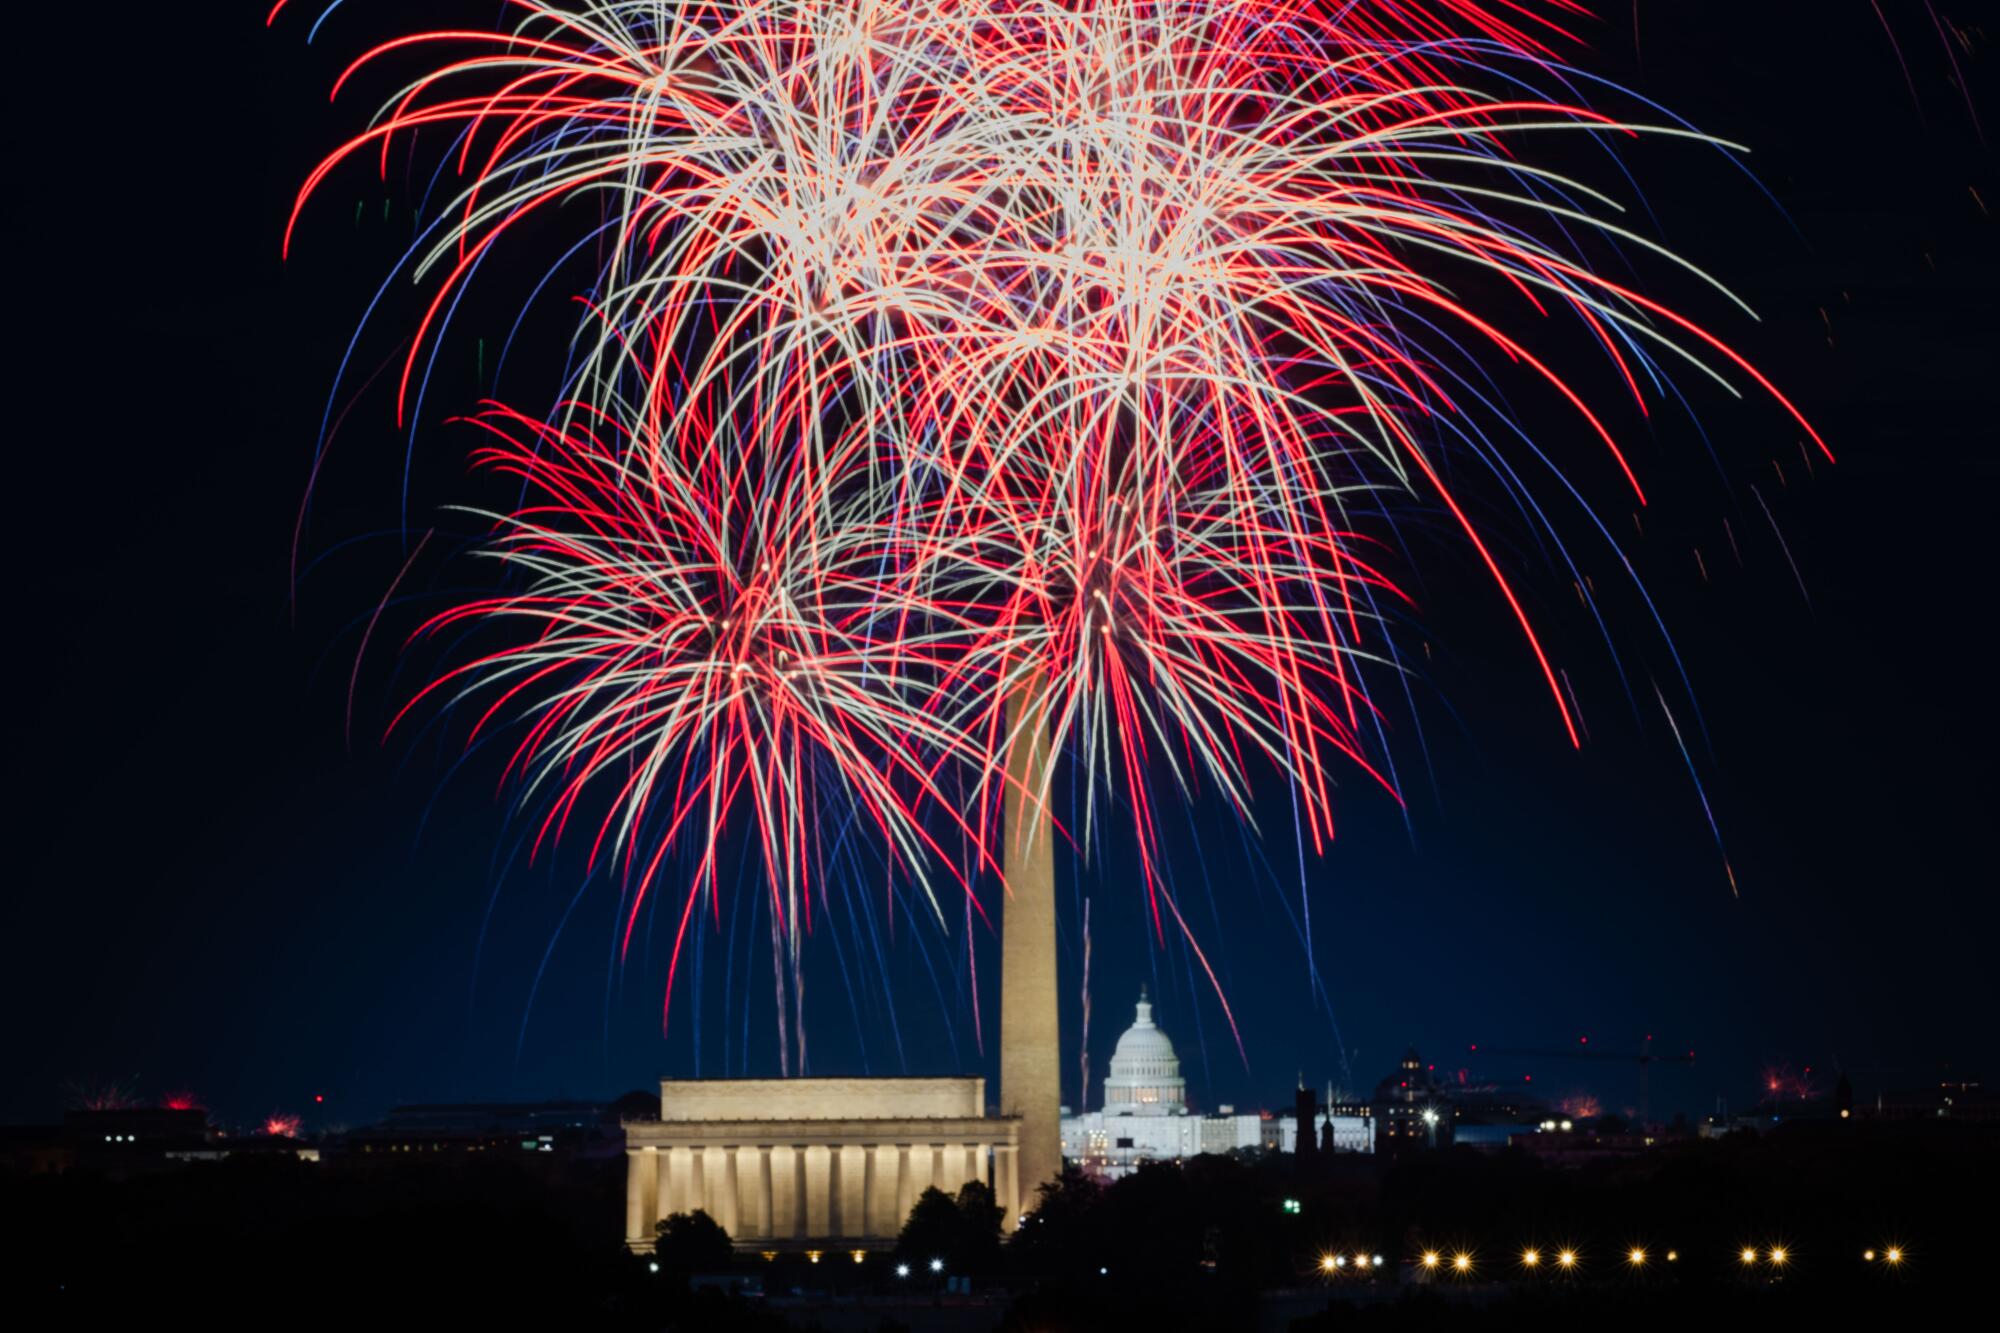 Fireworks show over the National Mall.